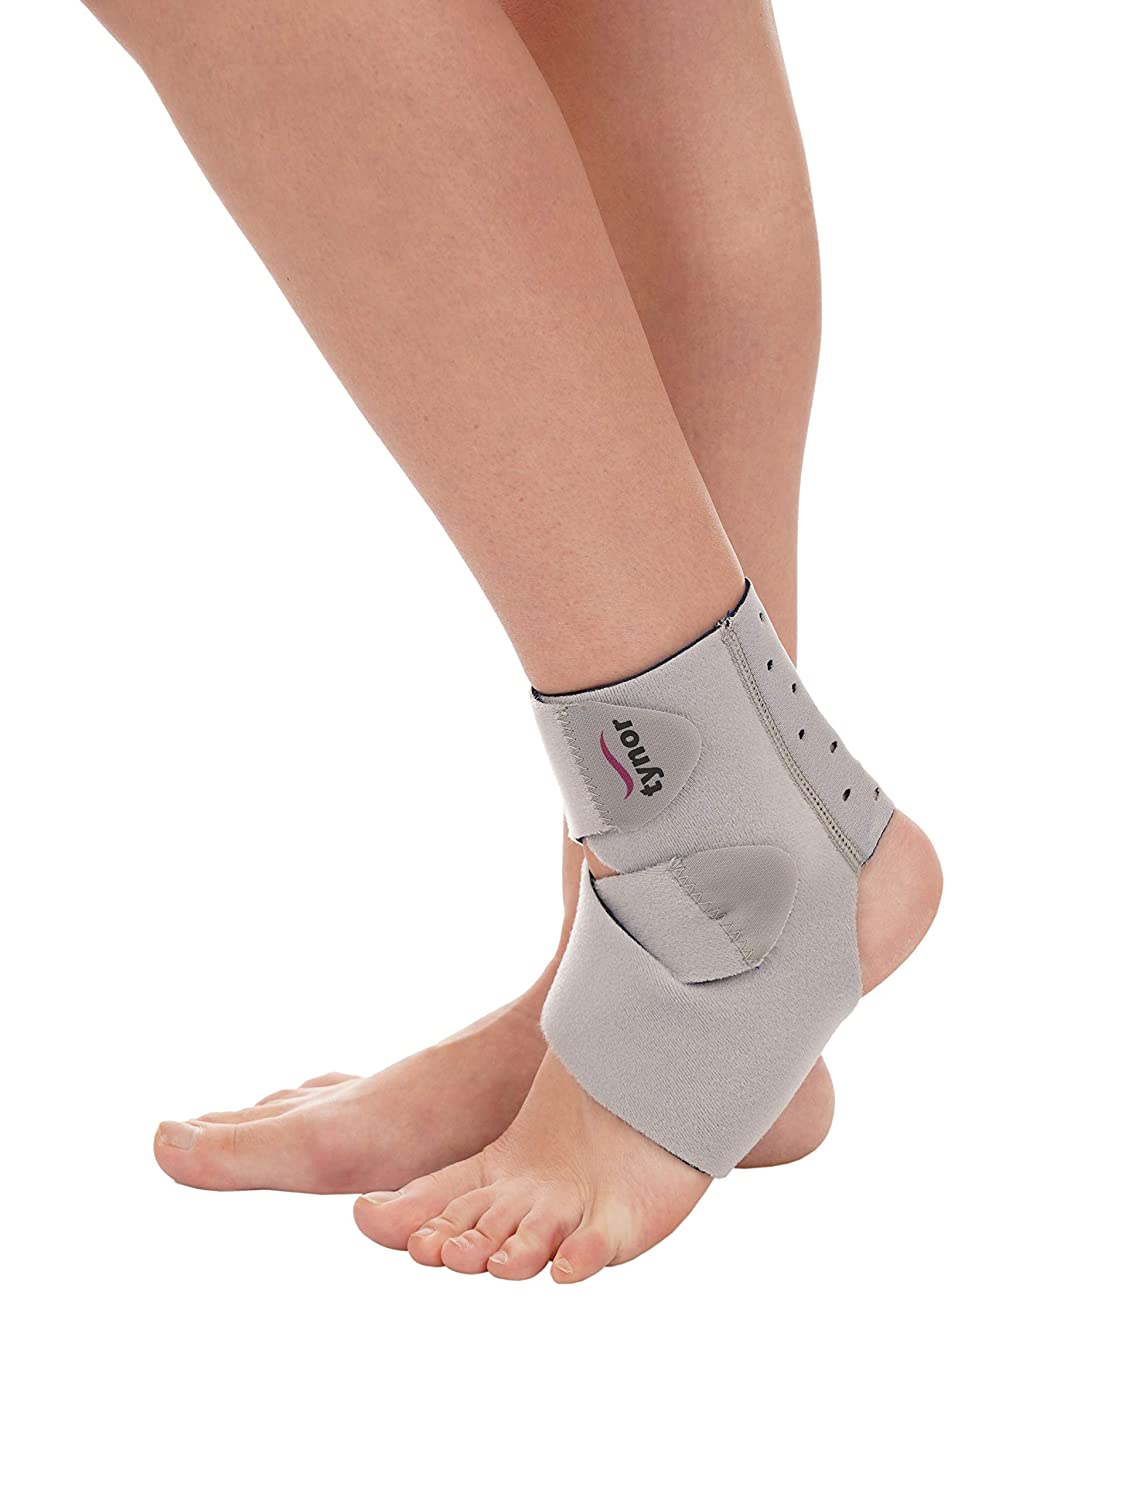 Adjustable Ankle Wrap Ankle Support | Chronic Ankle Instability Tynor ...